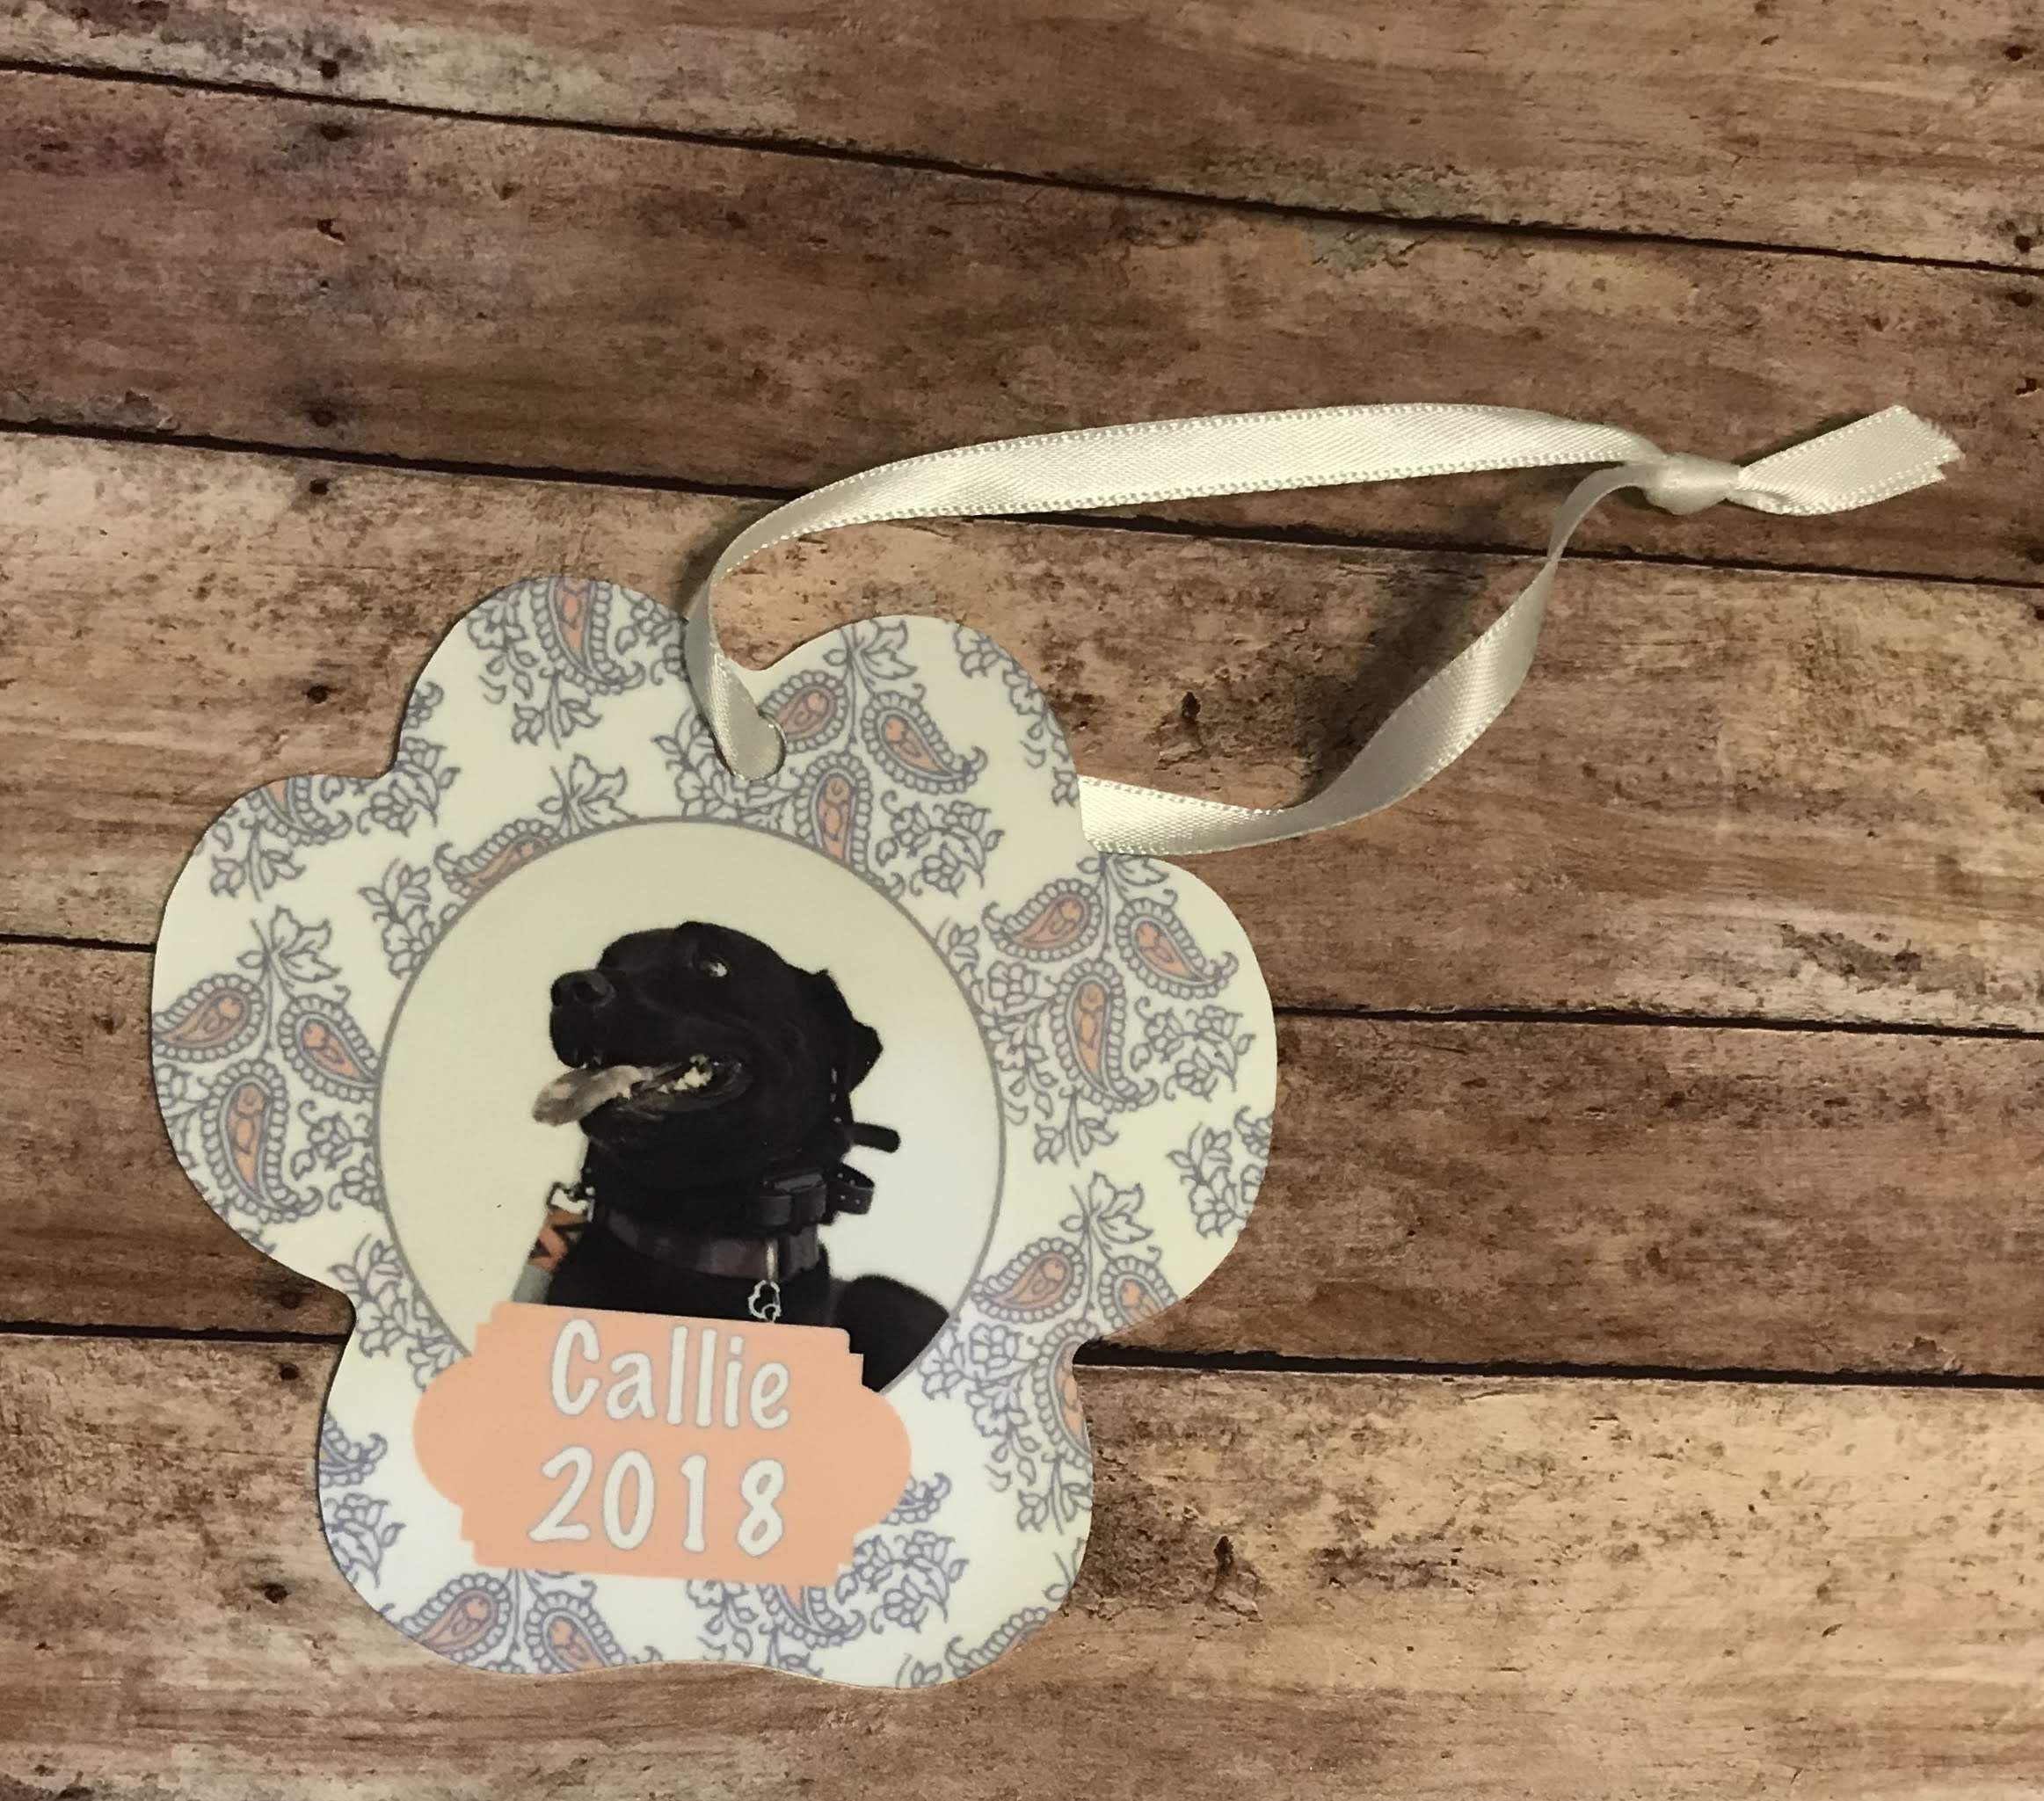 Paw Print Ornament made with sublimation printing